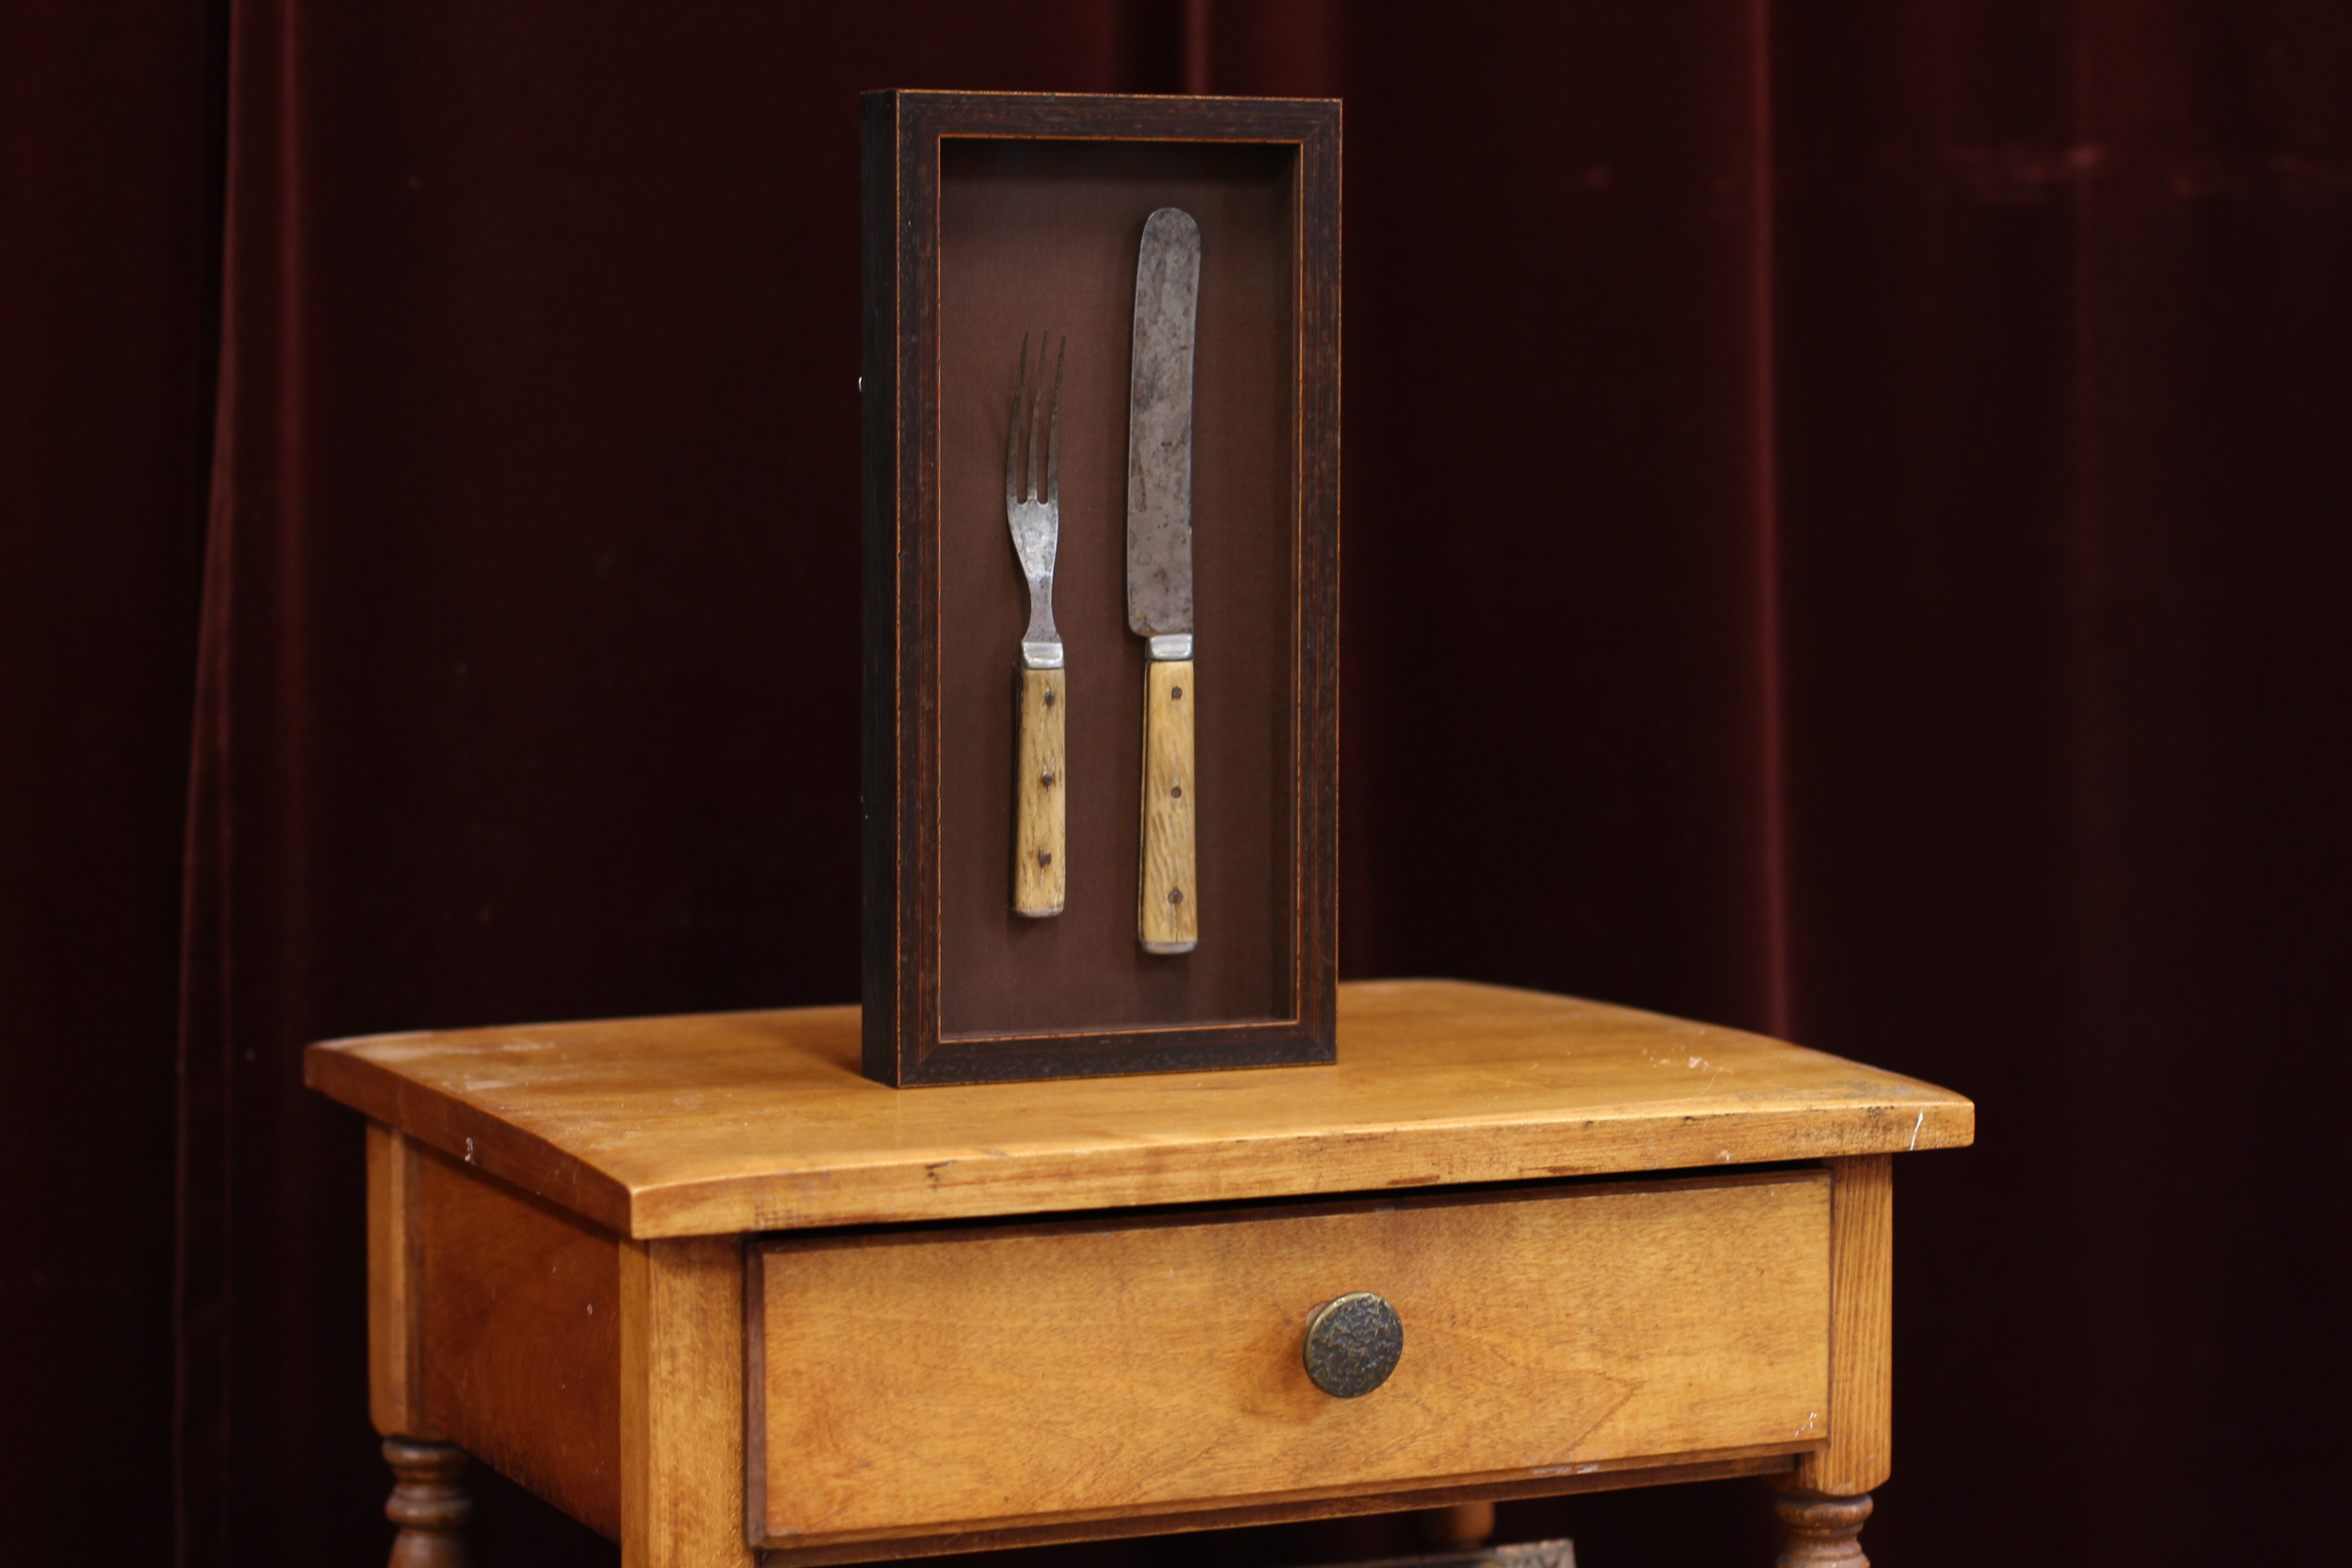 Knife and Fork in Shadowbox Frame